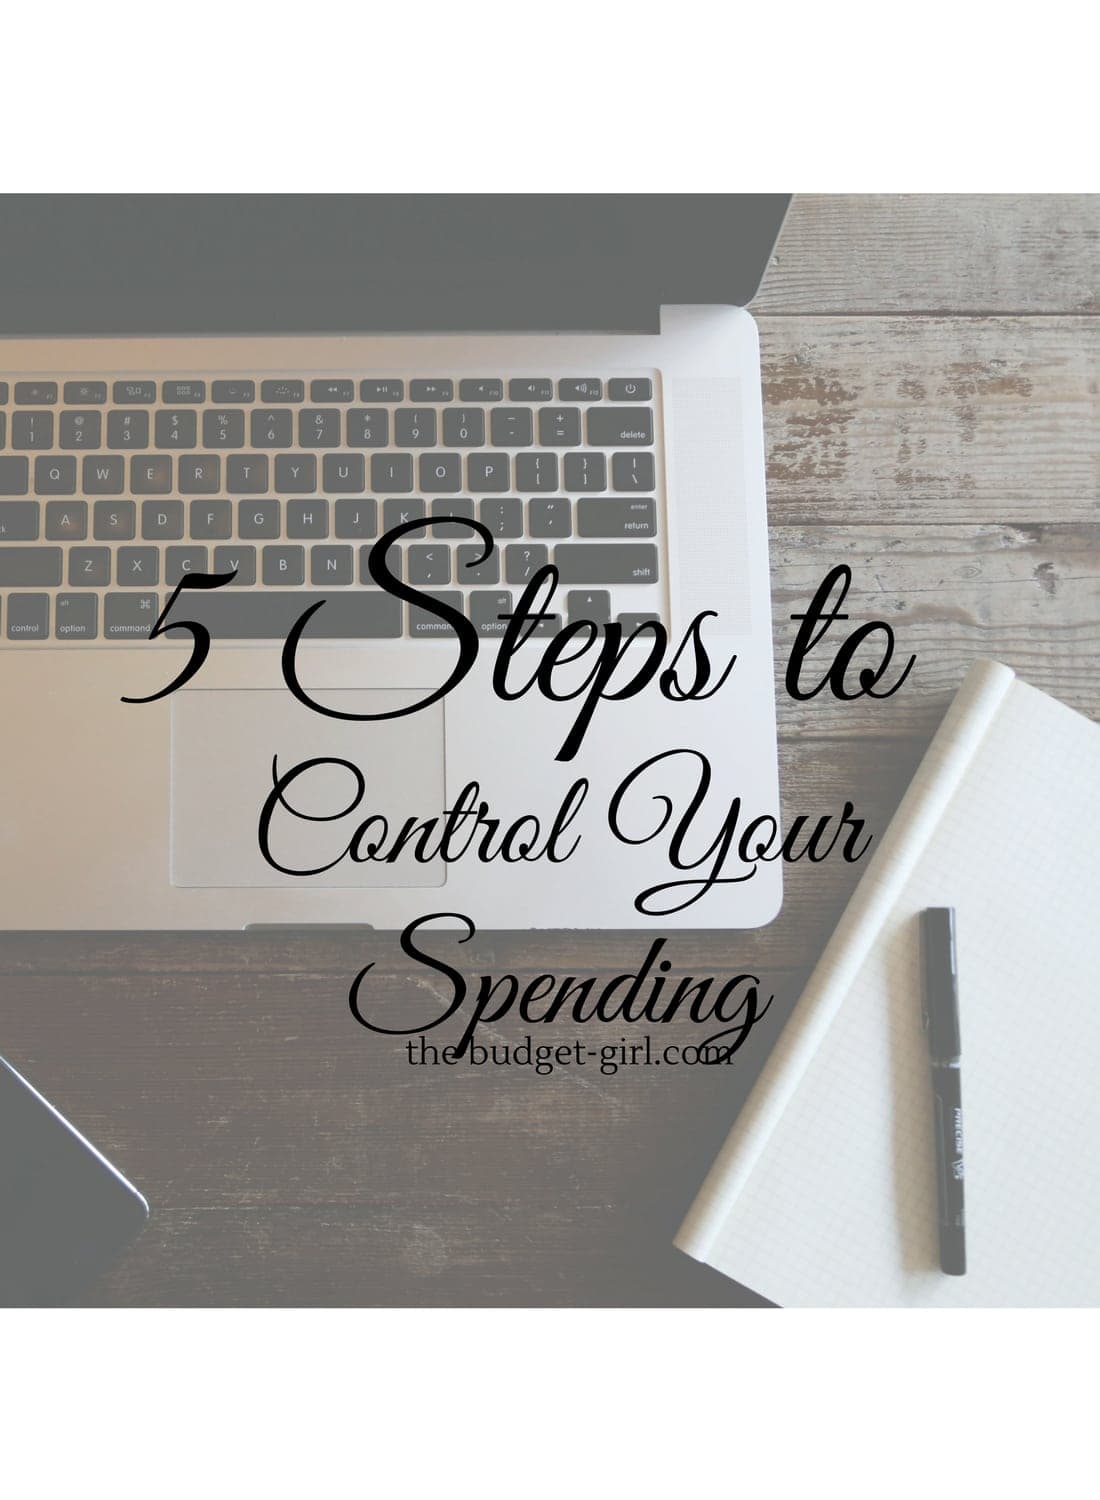 5 Steps to Control Your Spending!